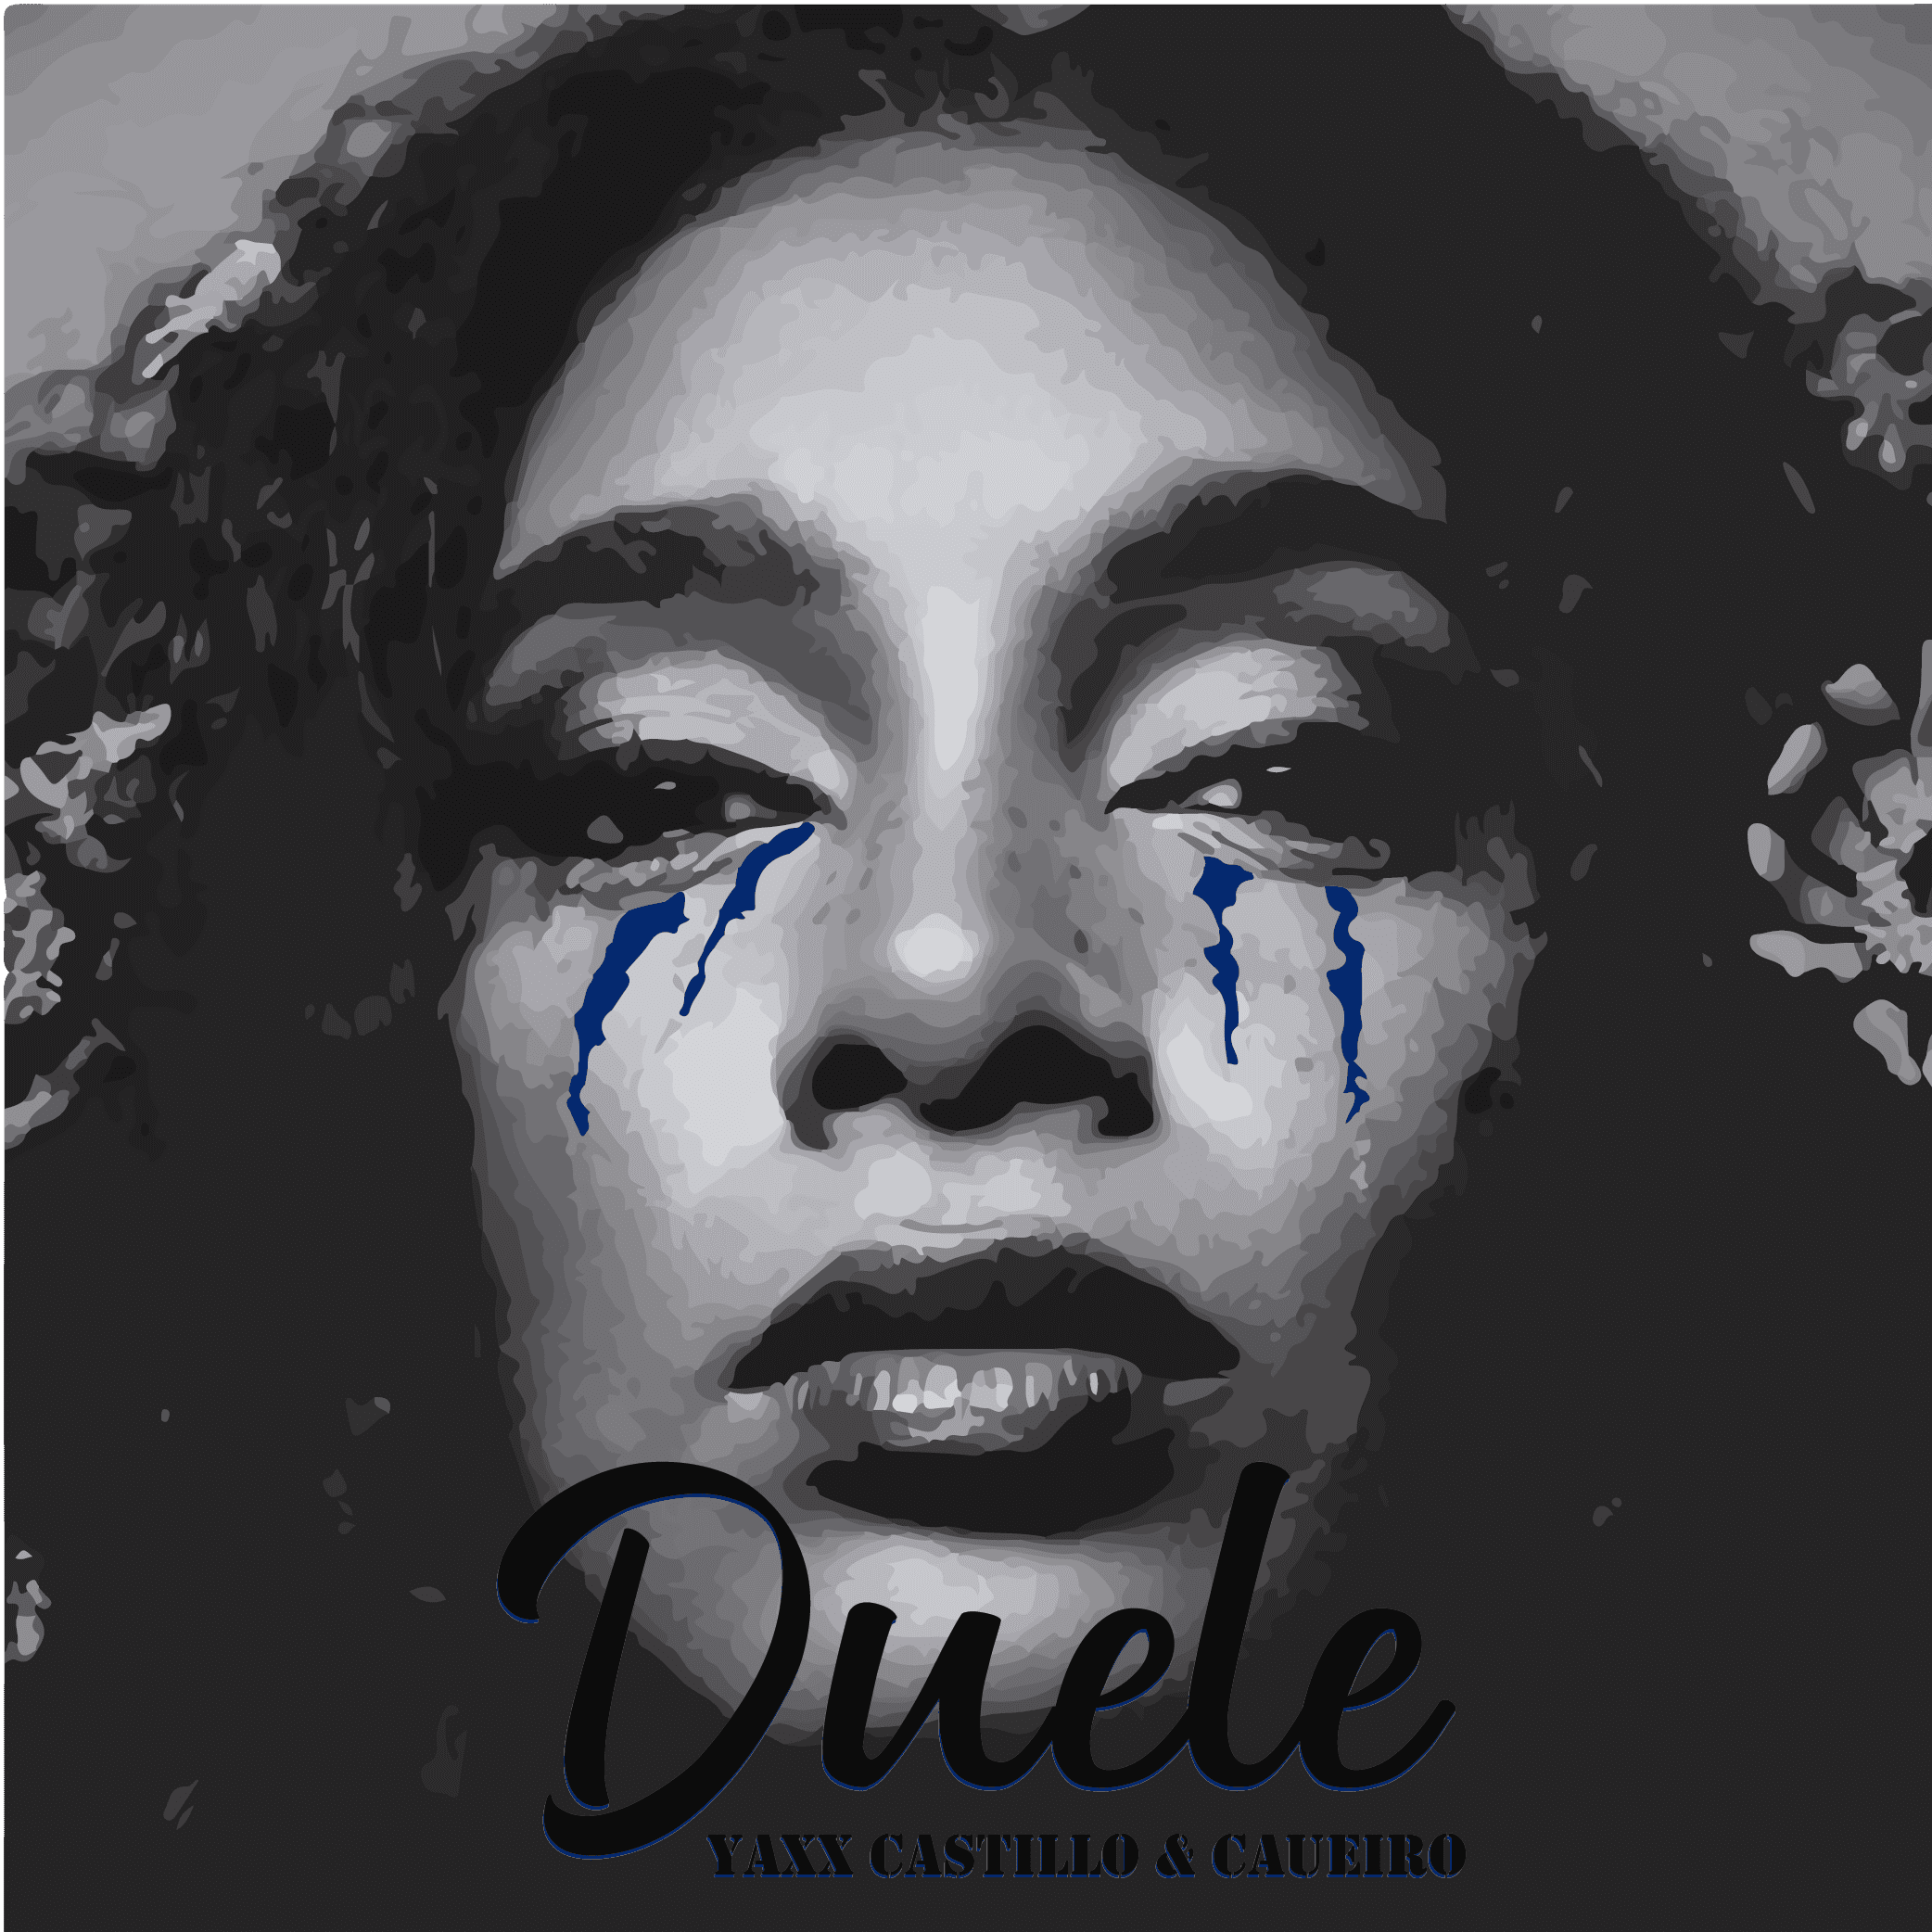 Cover art for "Duele" by Yaxx Castillo